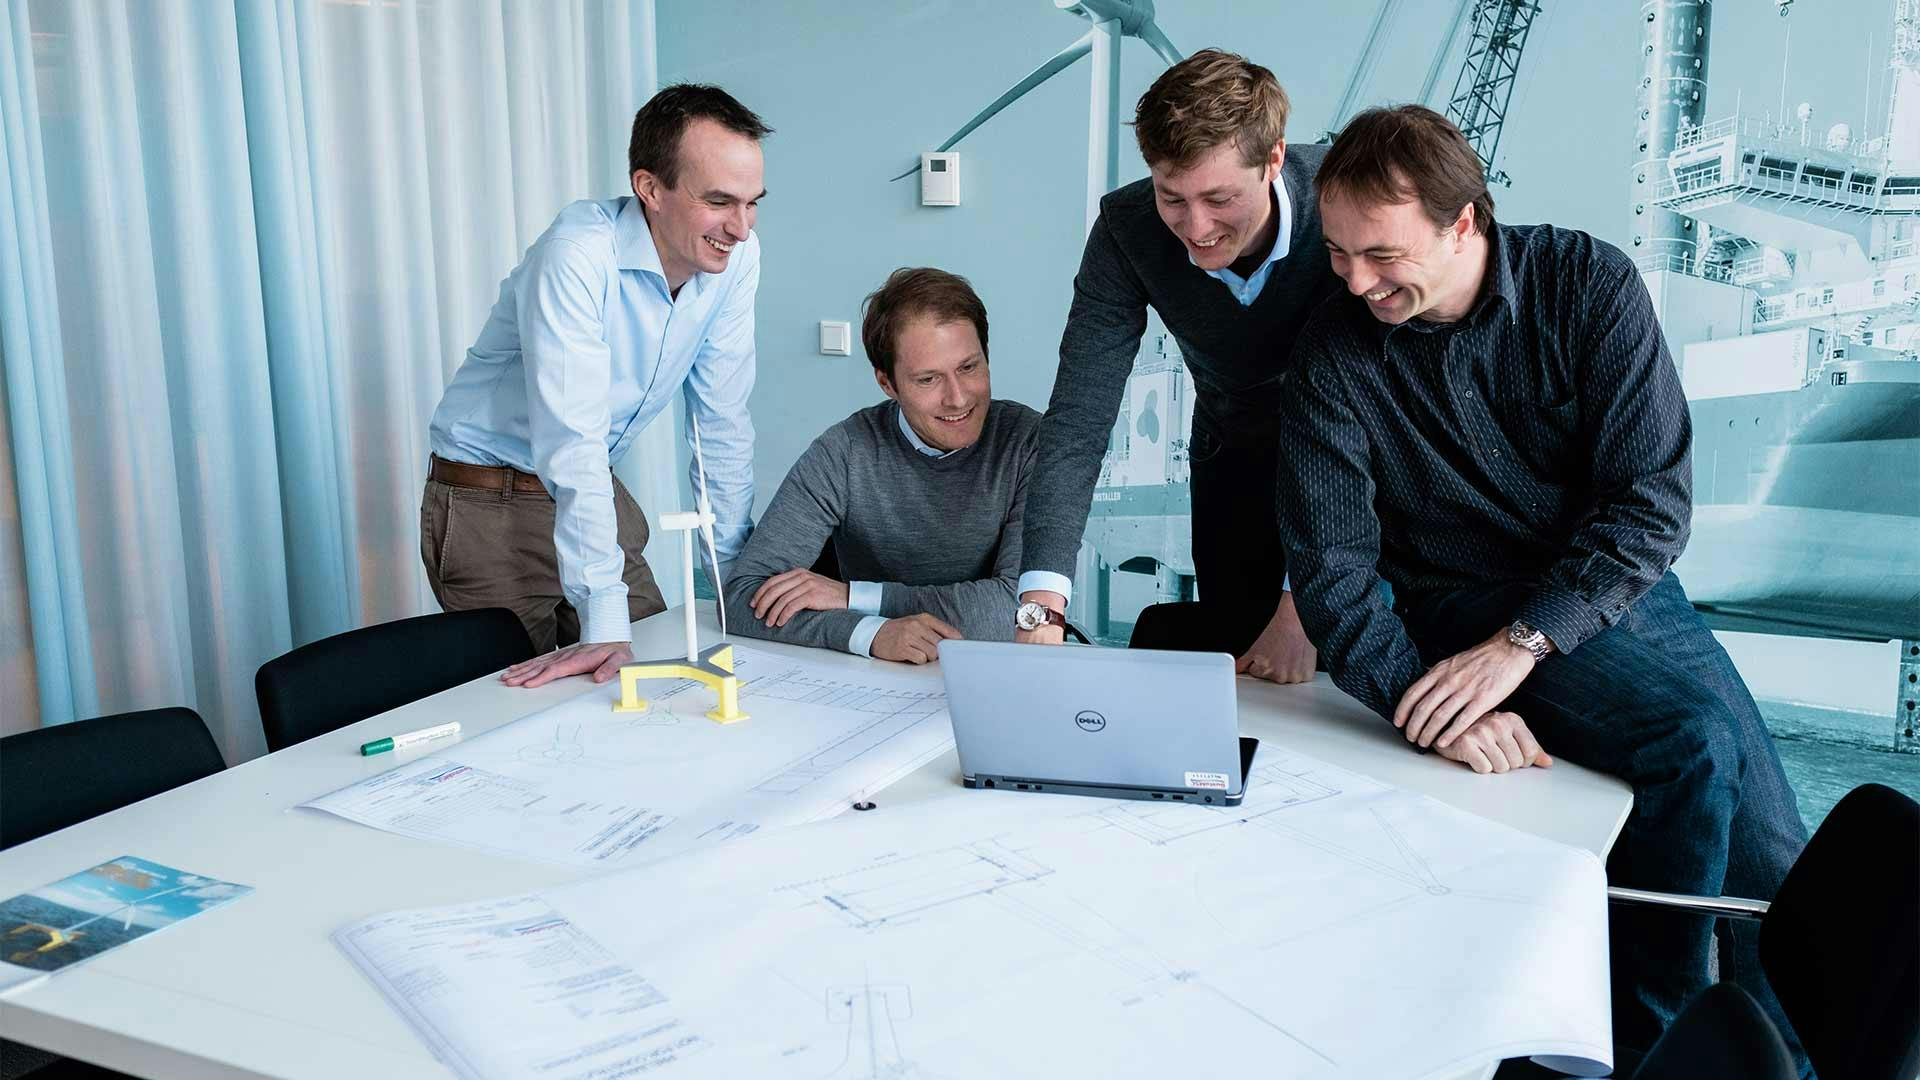 Senior Expert Engineer, Fons and colleagues reviewing designs for floating windmill platforms at GustoMSC office in Schiedam, The Netherlands